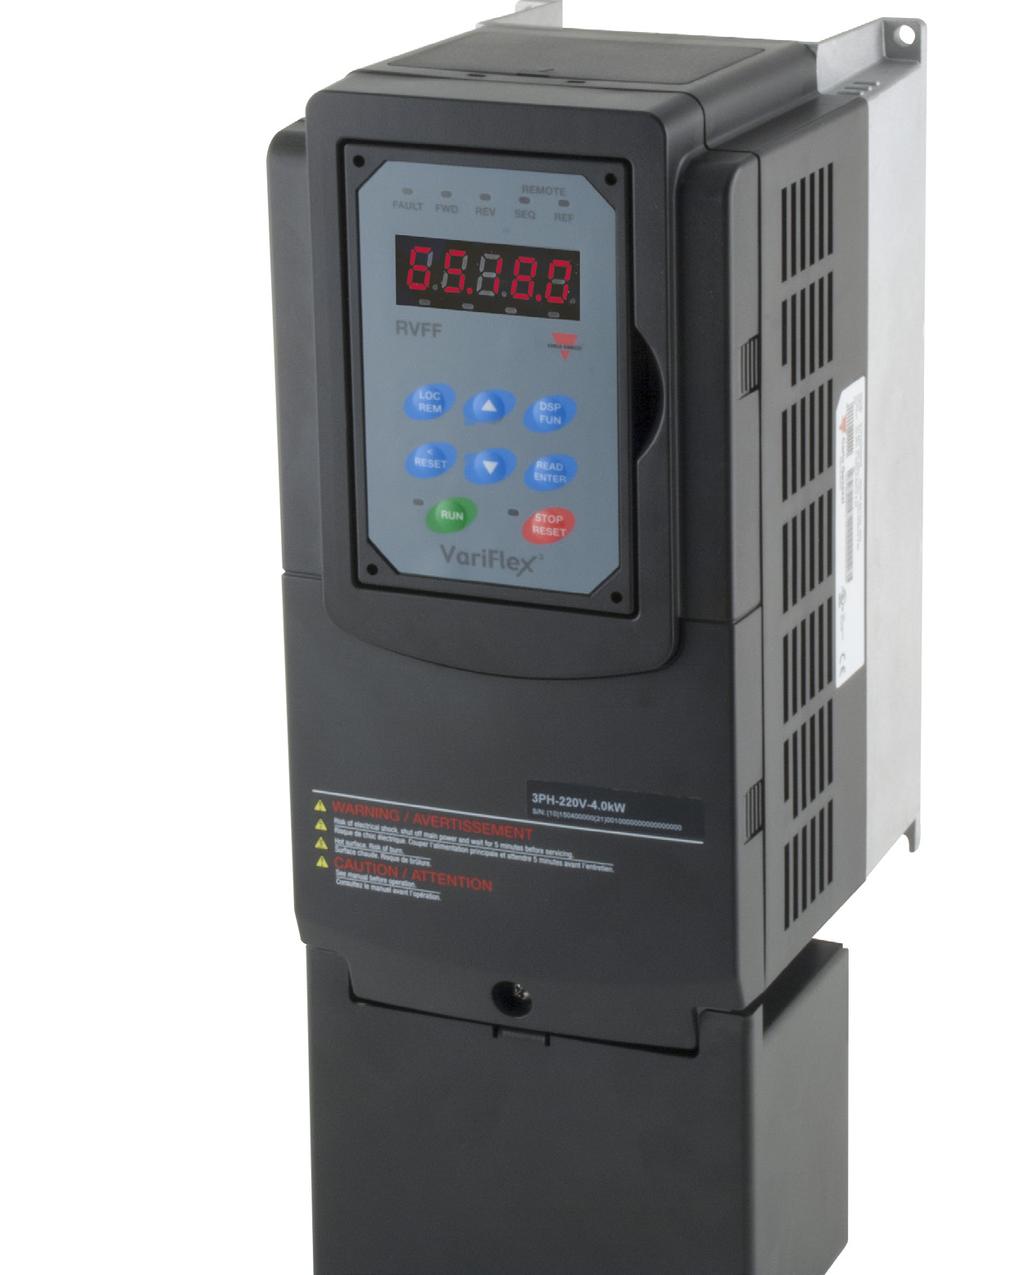 RVFF series AC Variable frequency drives The VariFlex 3 RVFF series has a modular design, and is intended not only for applications requiring a high level of protection, but also for maintaining